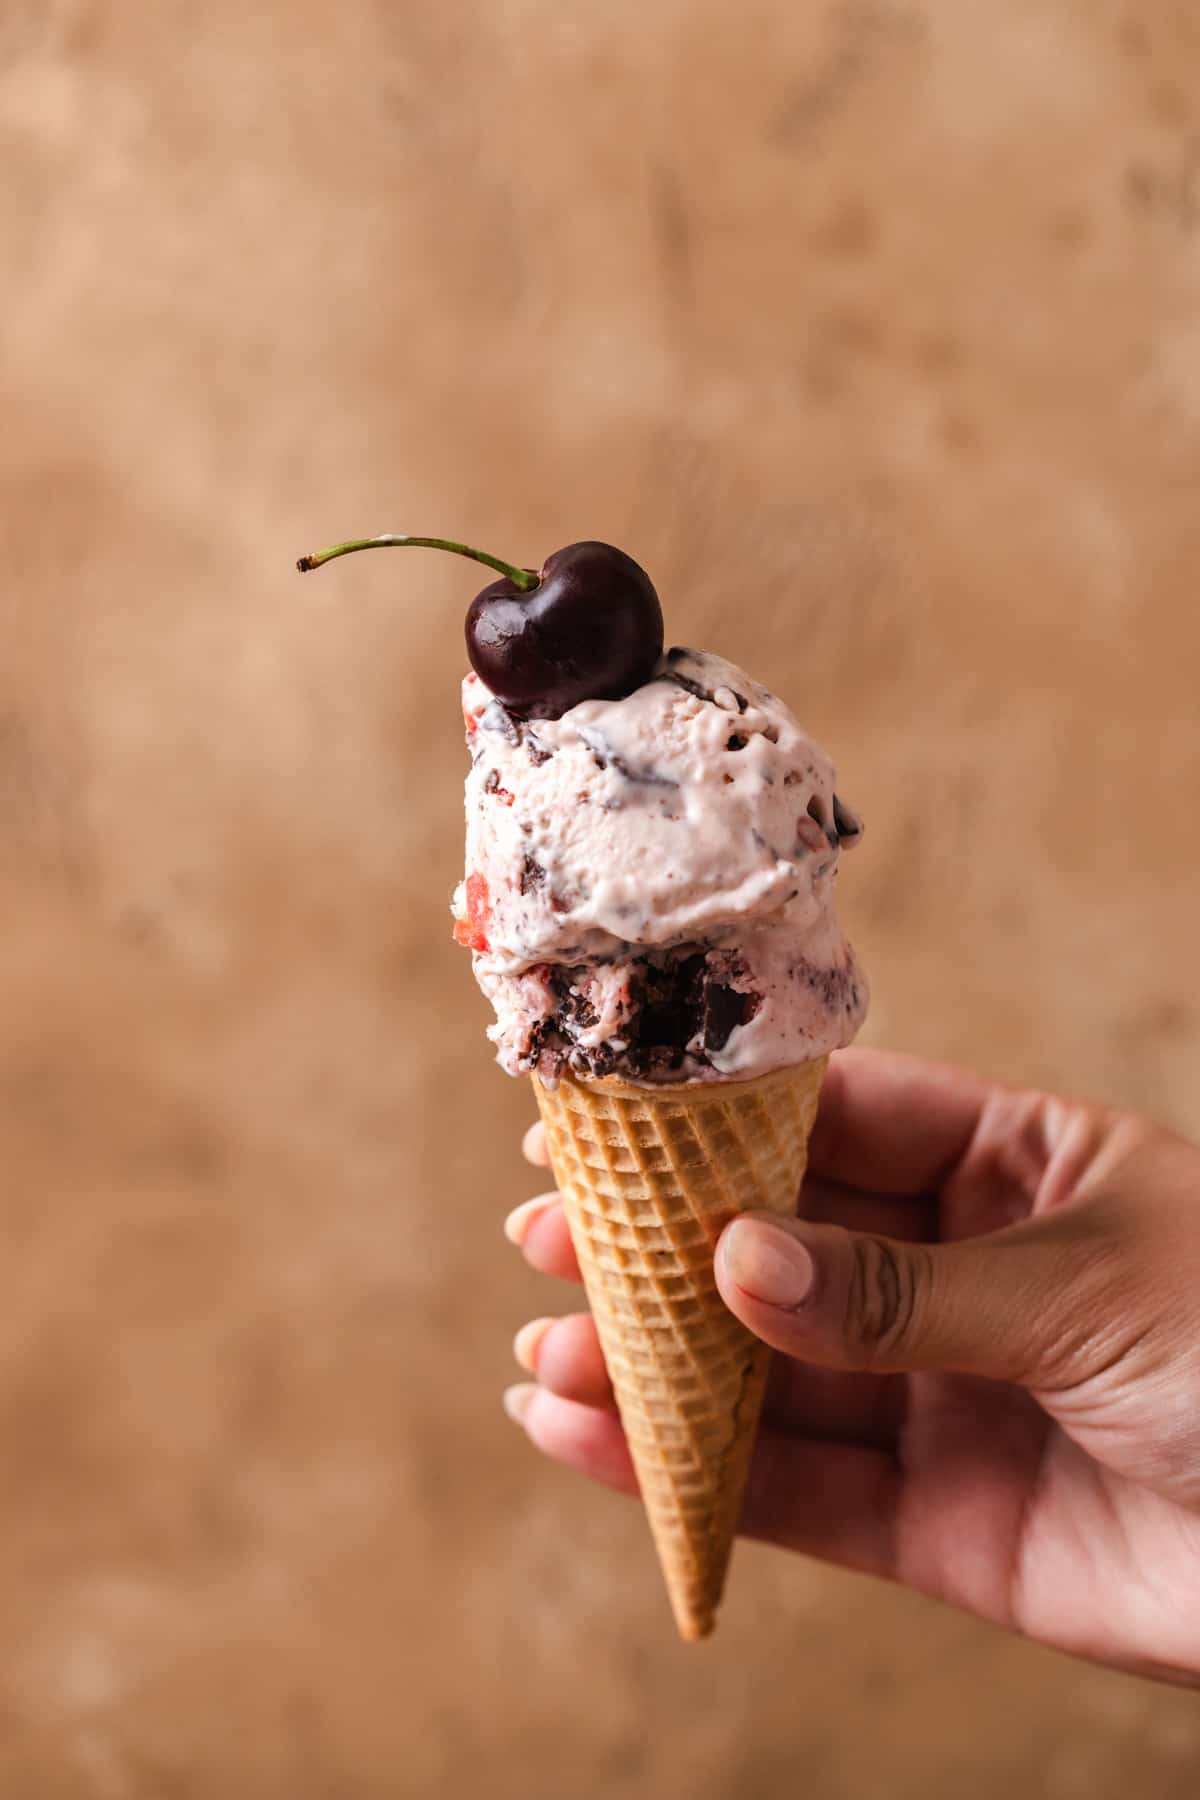 A hand holding up an ice cream cone garnished with a cherry.